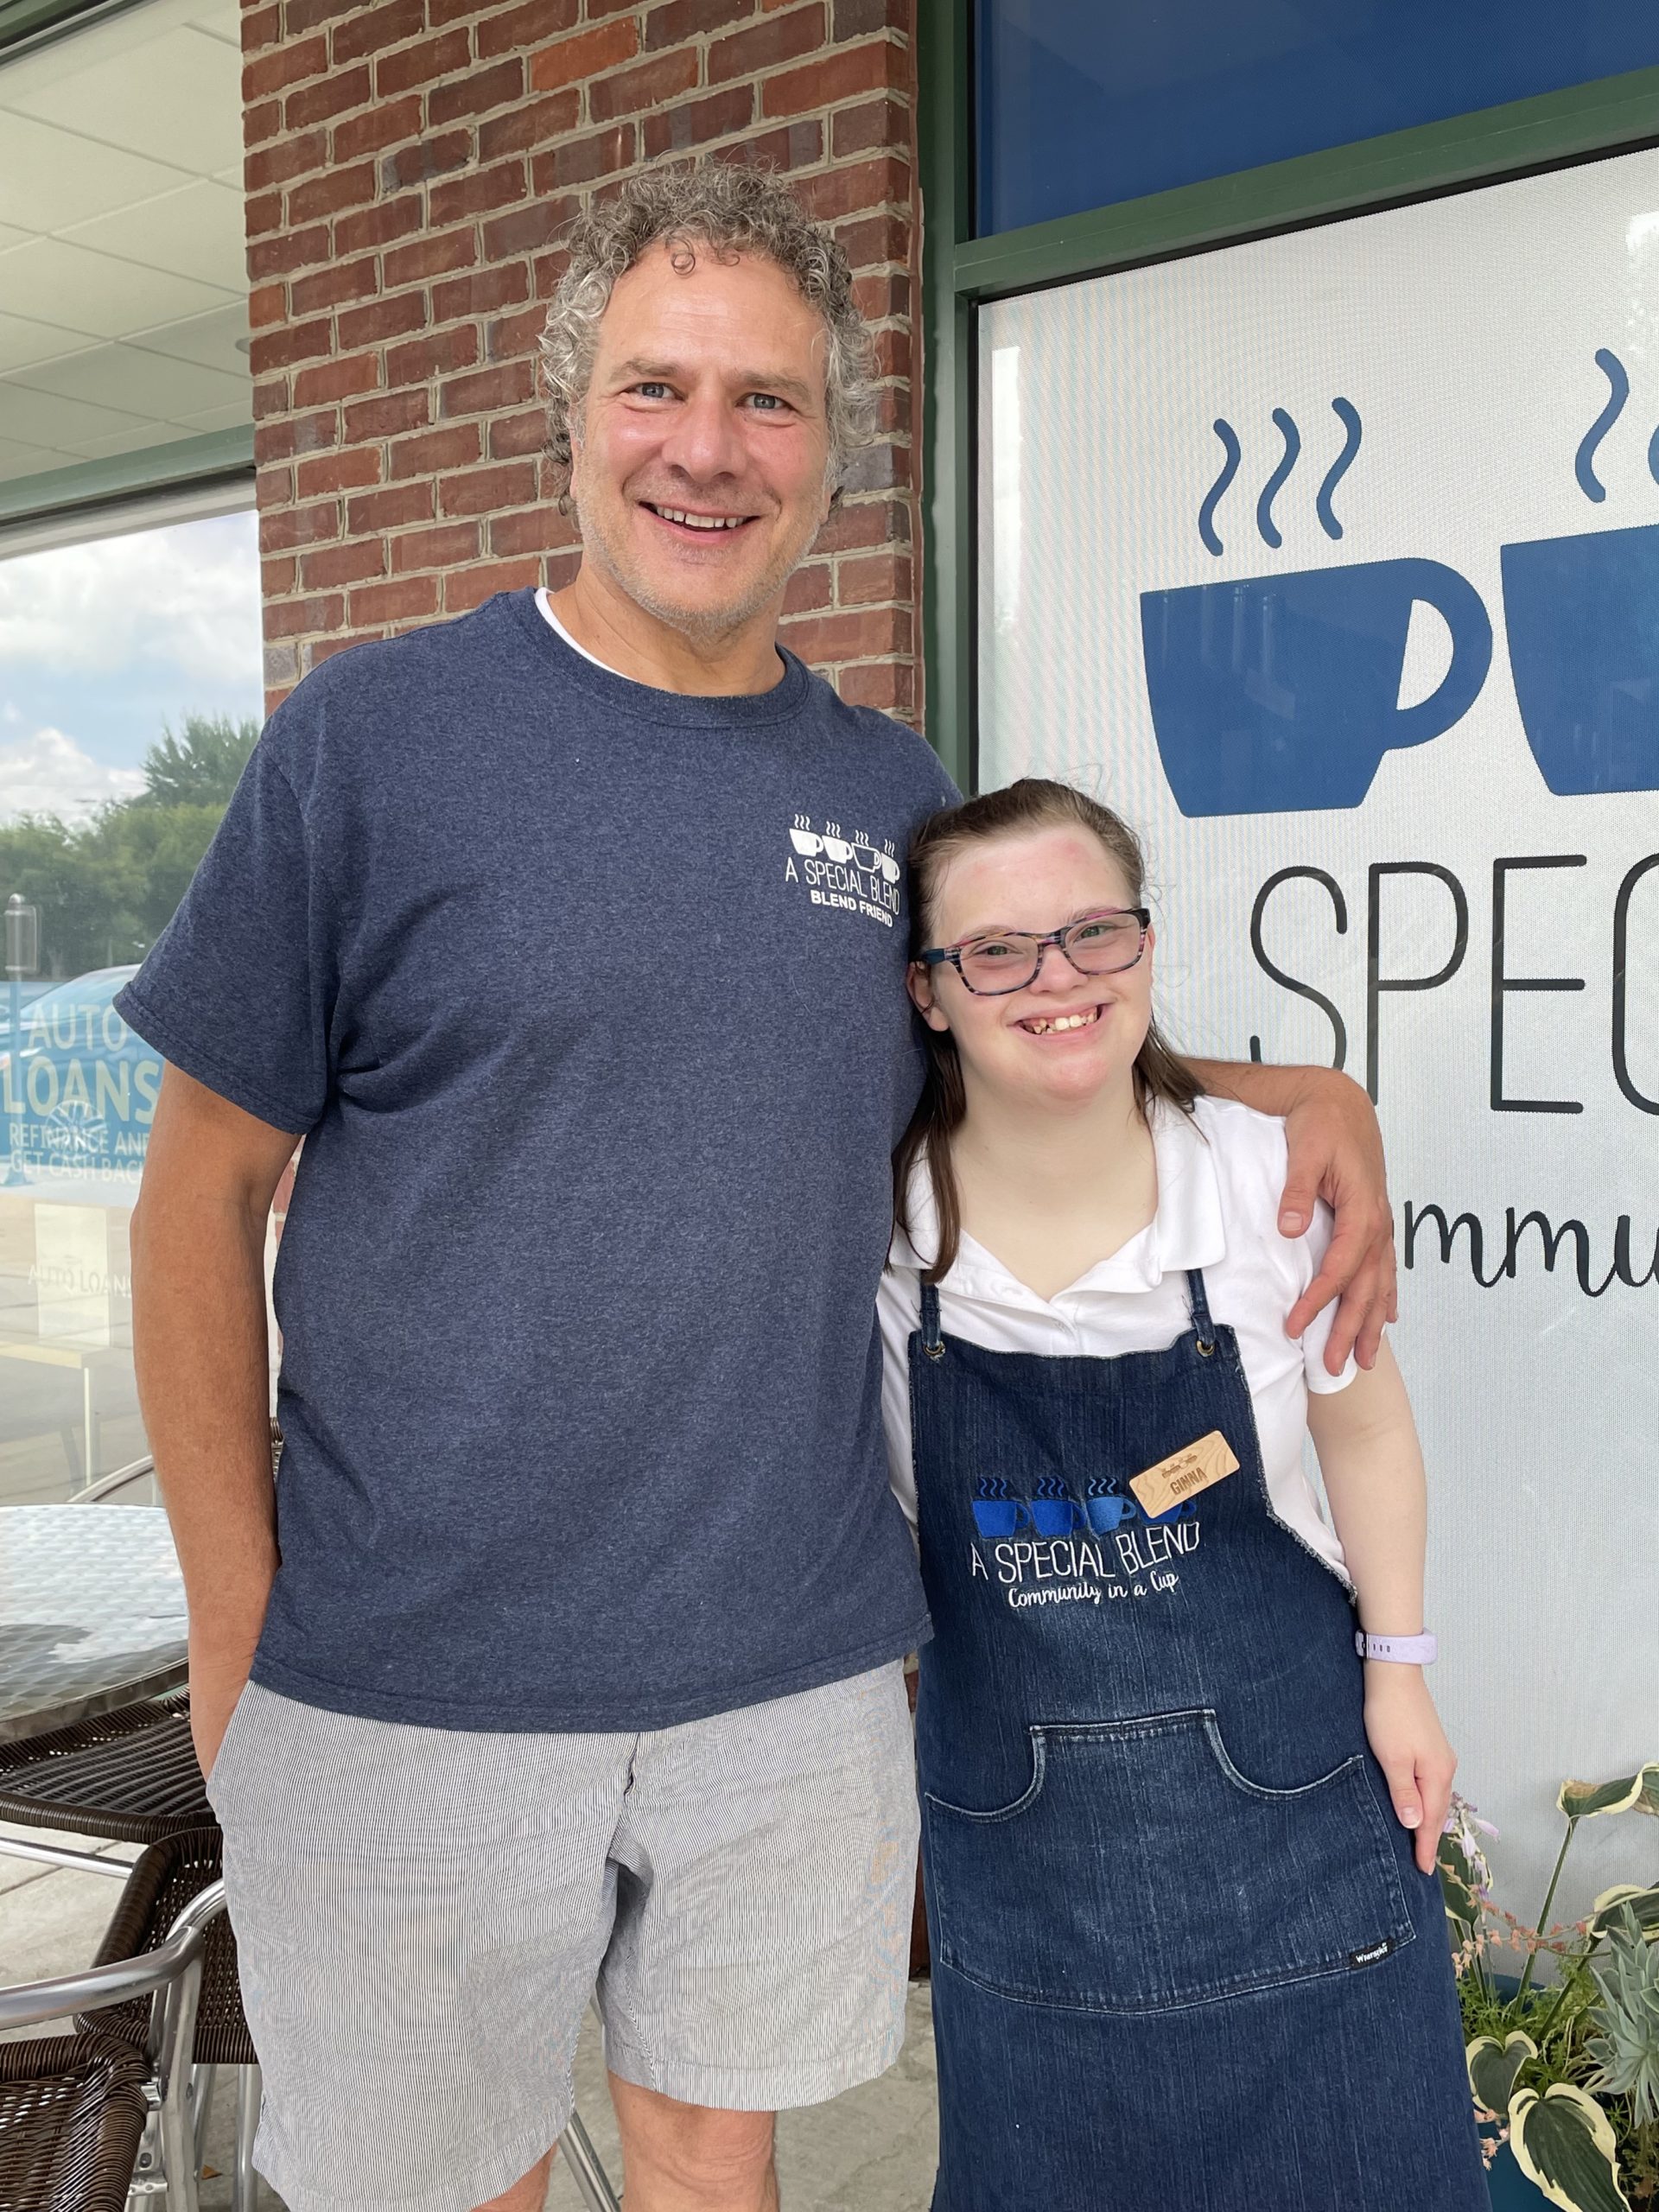 A leader at A Special Blend stands with an employee in front of the coffee shop in Greensboro, NC.